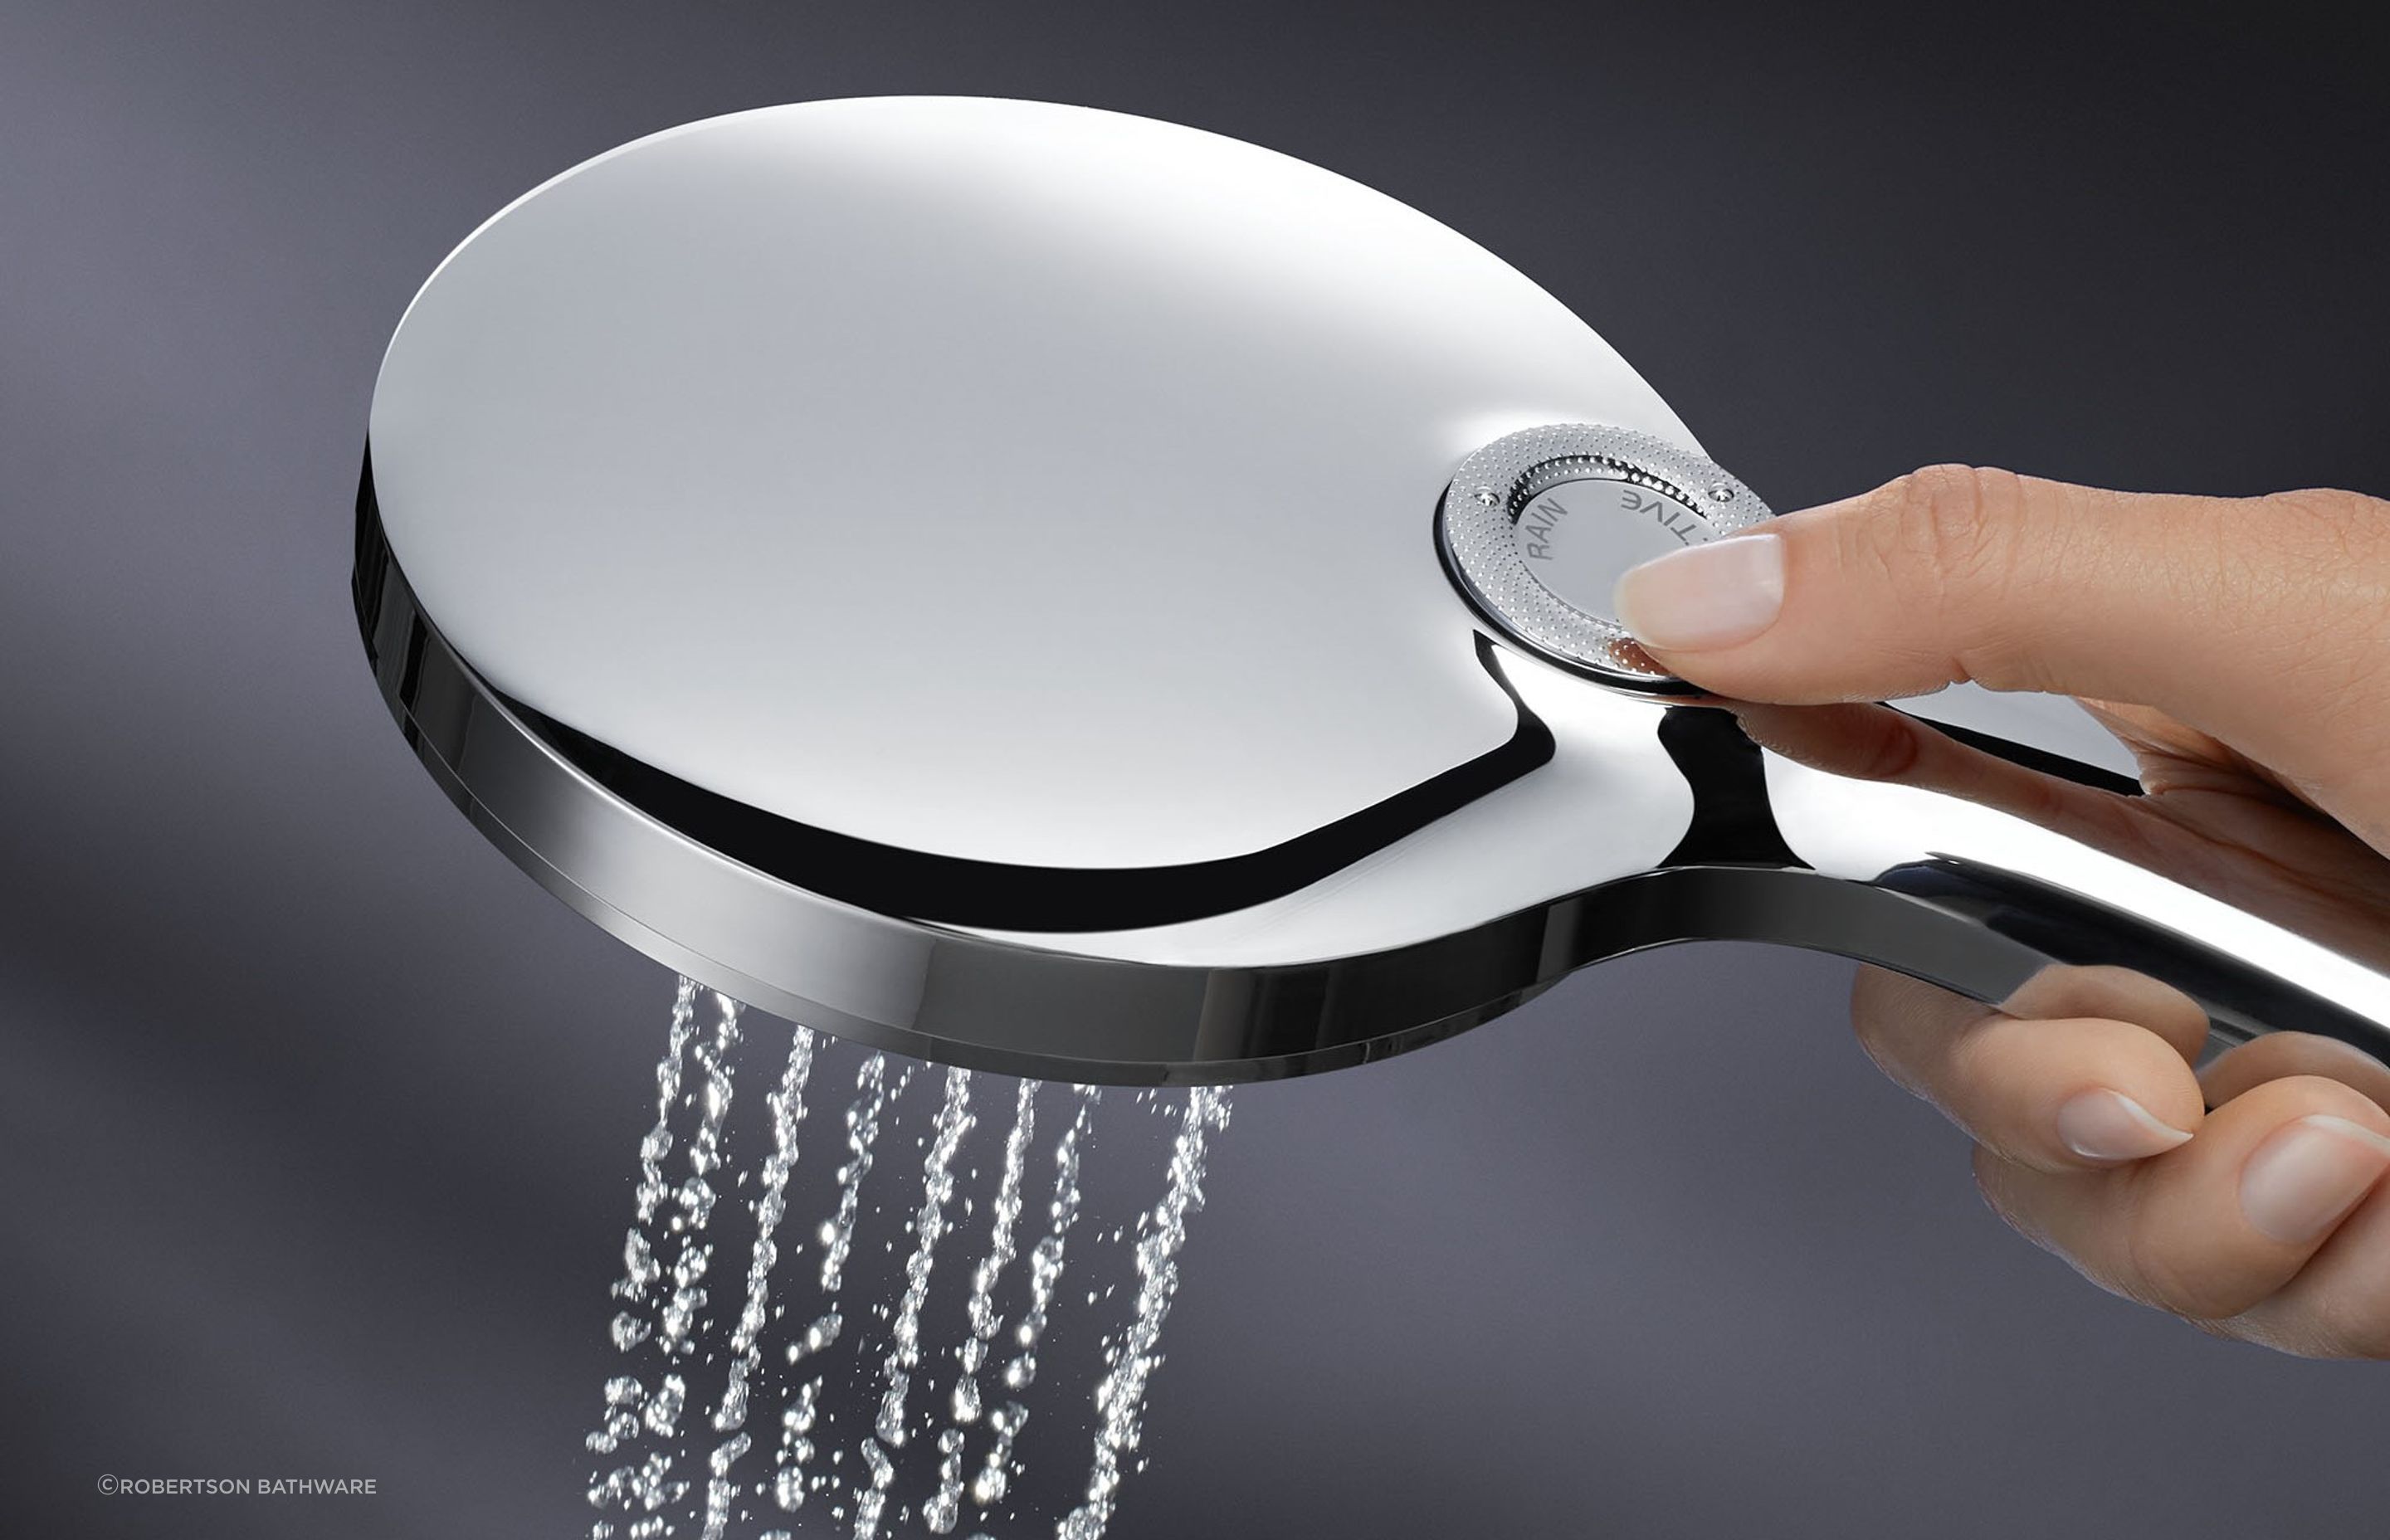 Some shower heads, like the Smart Active Shower from Grohe, have adjustable spray patterns for great versatility.